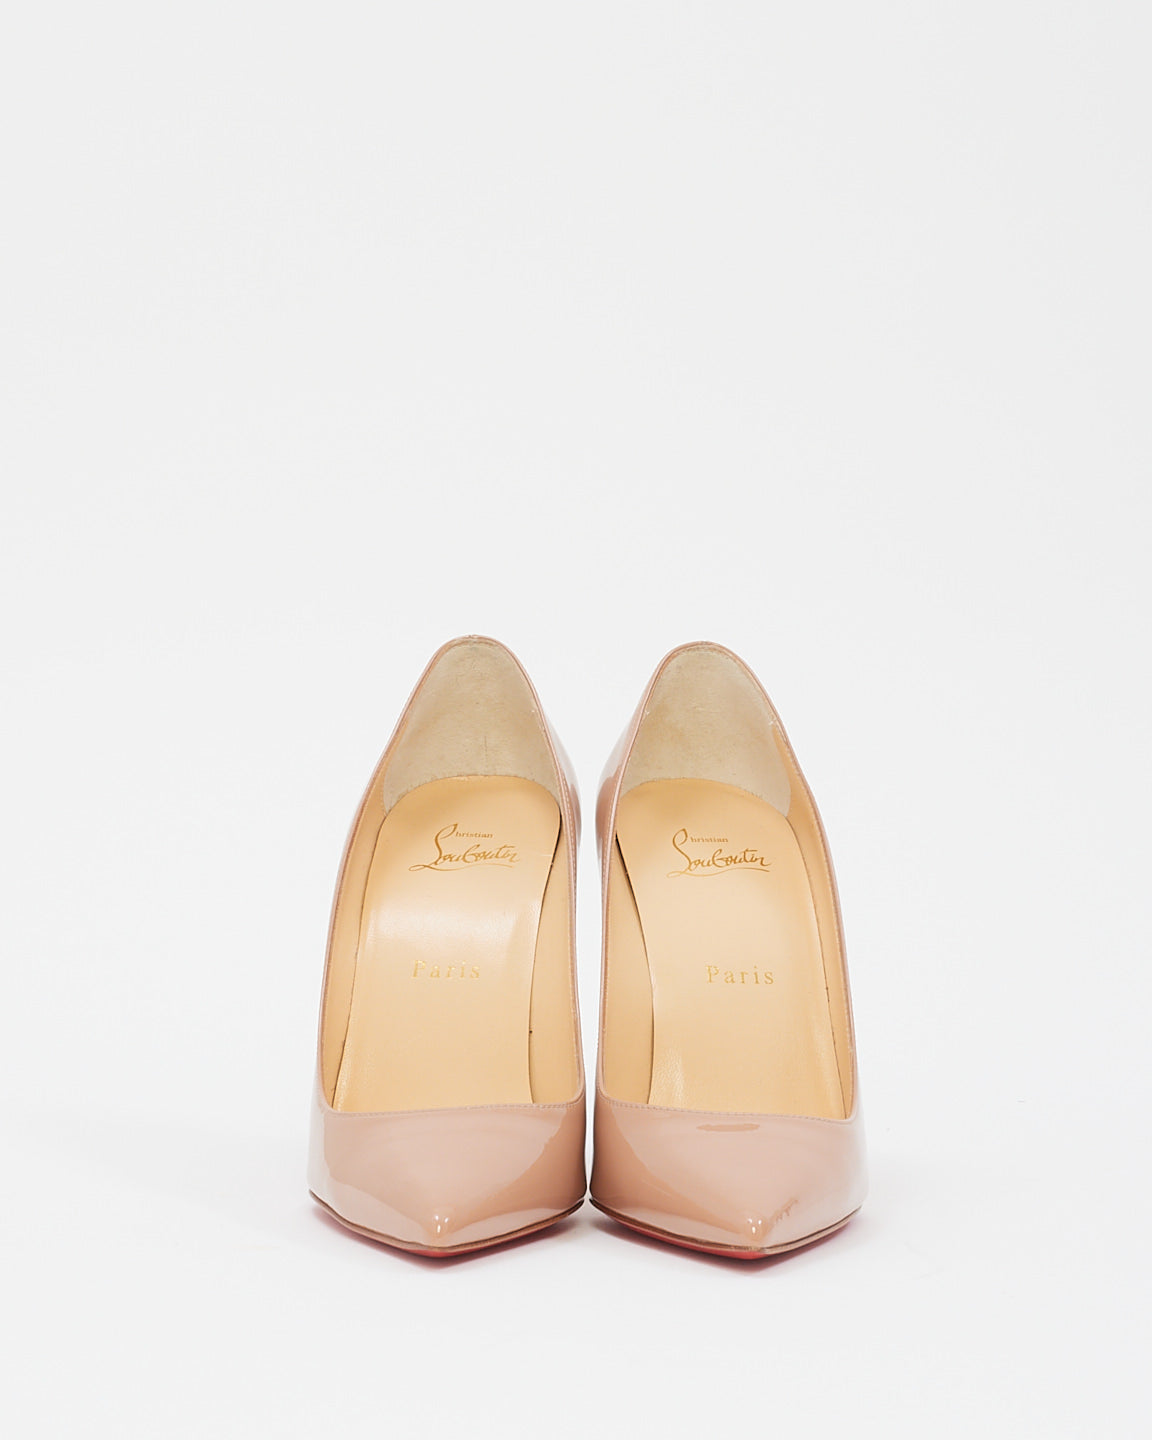 Christian Louboutin Beige Patent Leather Kate 100mm Pumps - 38